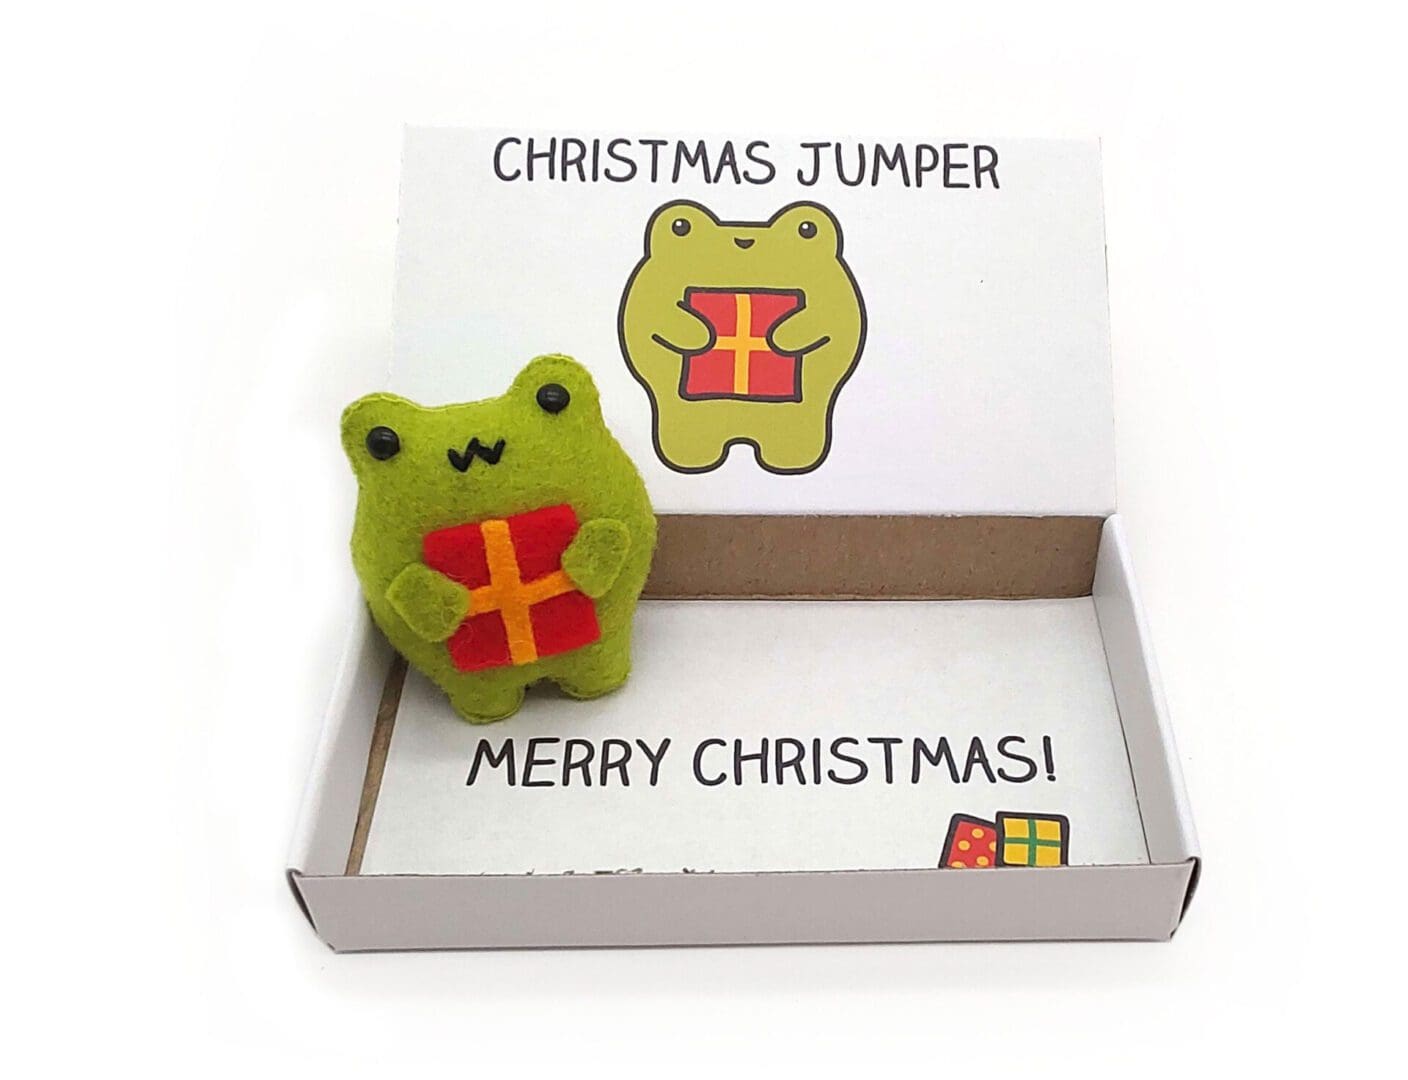 Cute handmade frog Christmas gift. A happy felt frog holding a Christmas presentin an illustrated matchbox that reads Christmas Jumper on the outside and Merry Christmas on the inside.